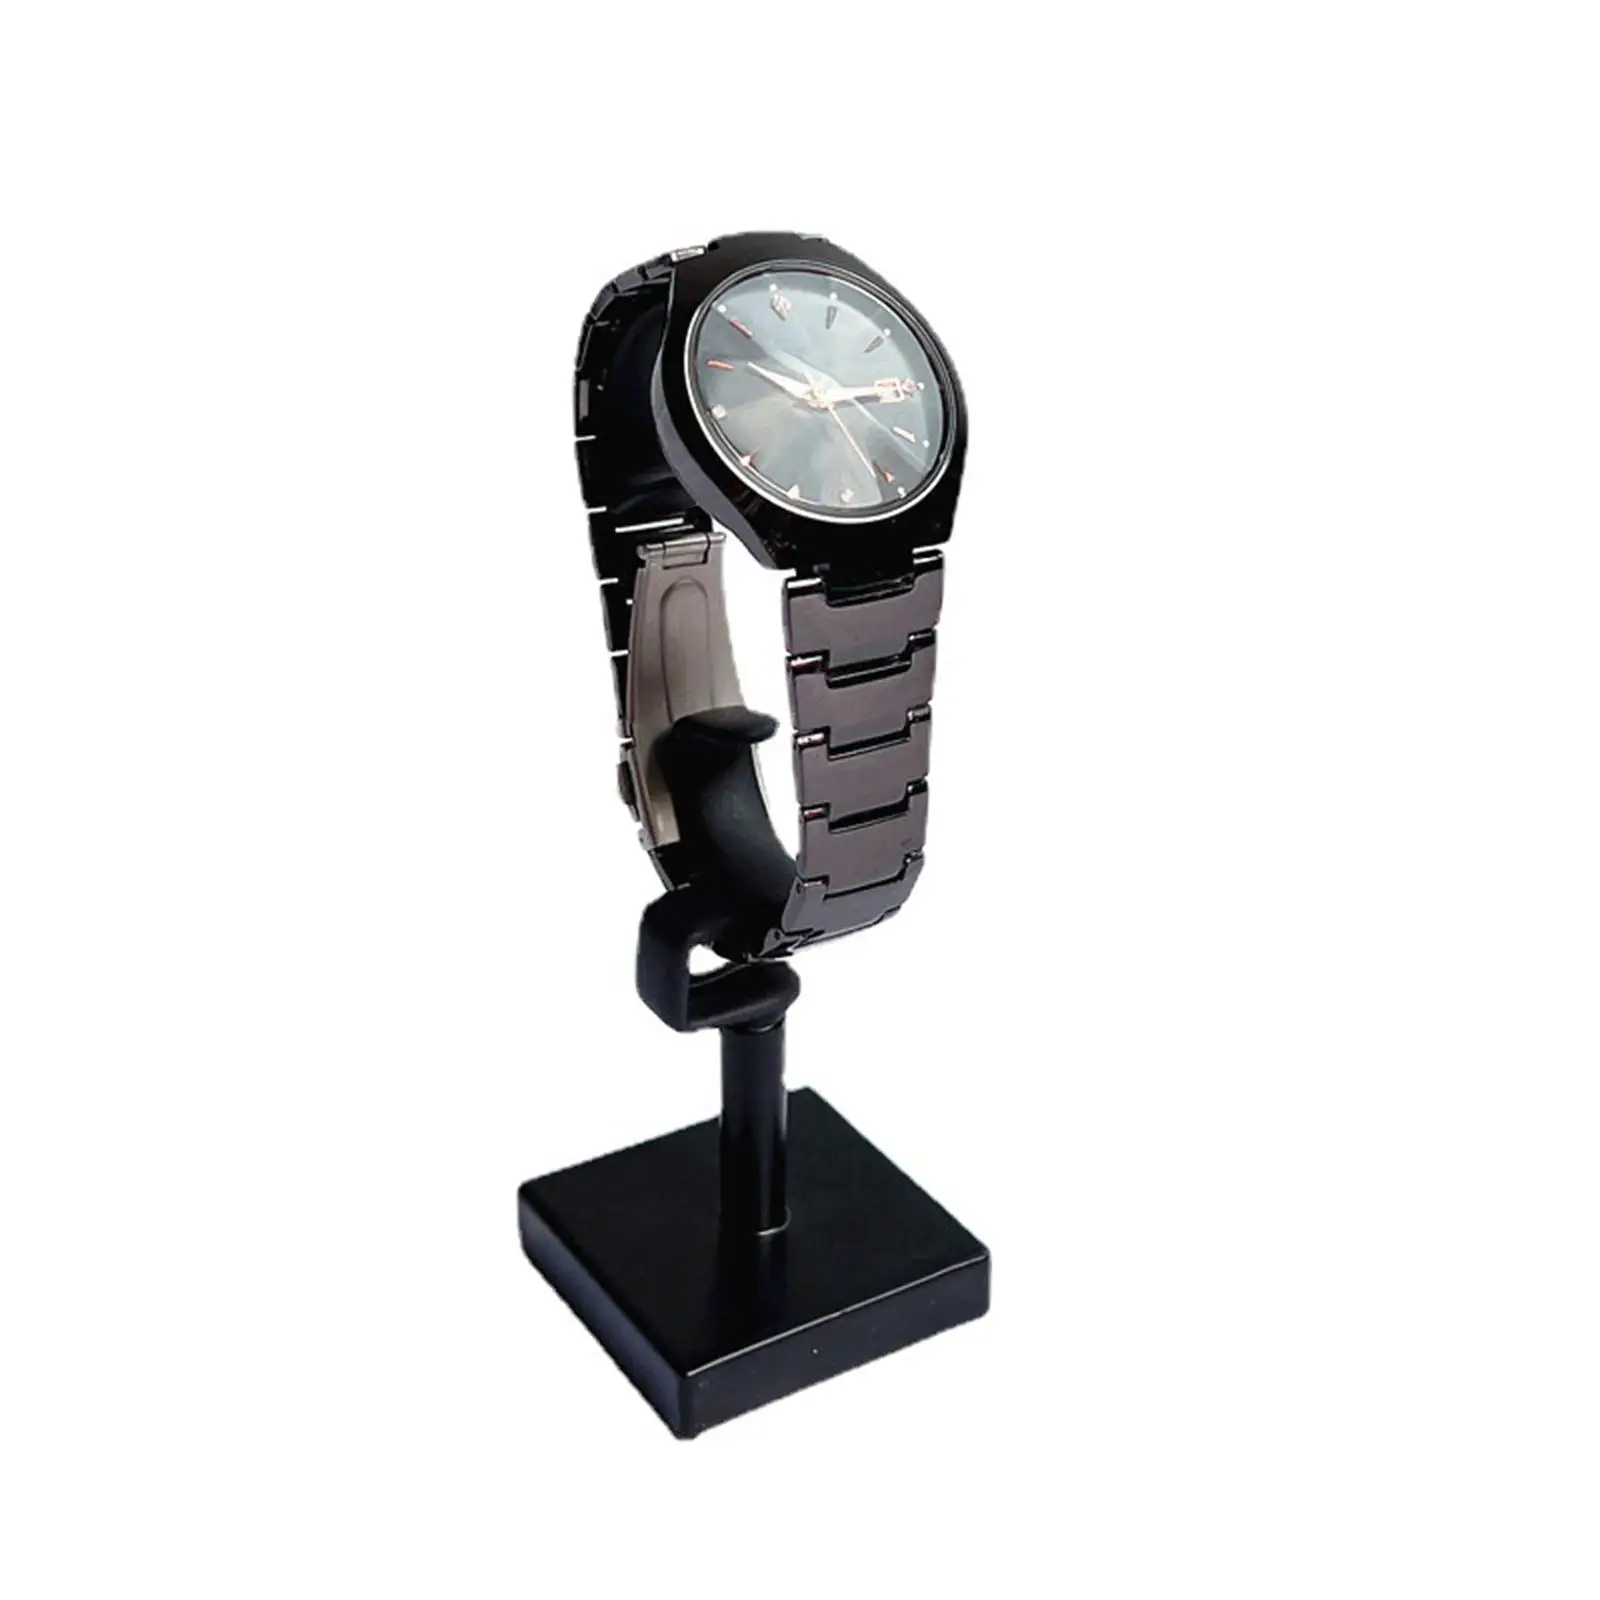 Durable Watch Display Stand Jewelry Organizer home decor Stable Bracelet Holder for Vanity Table Desktop Store Showcase